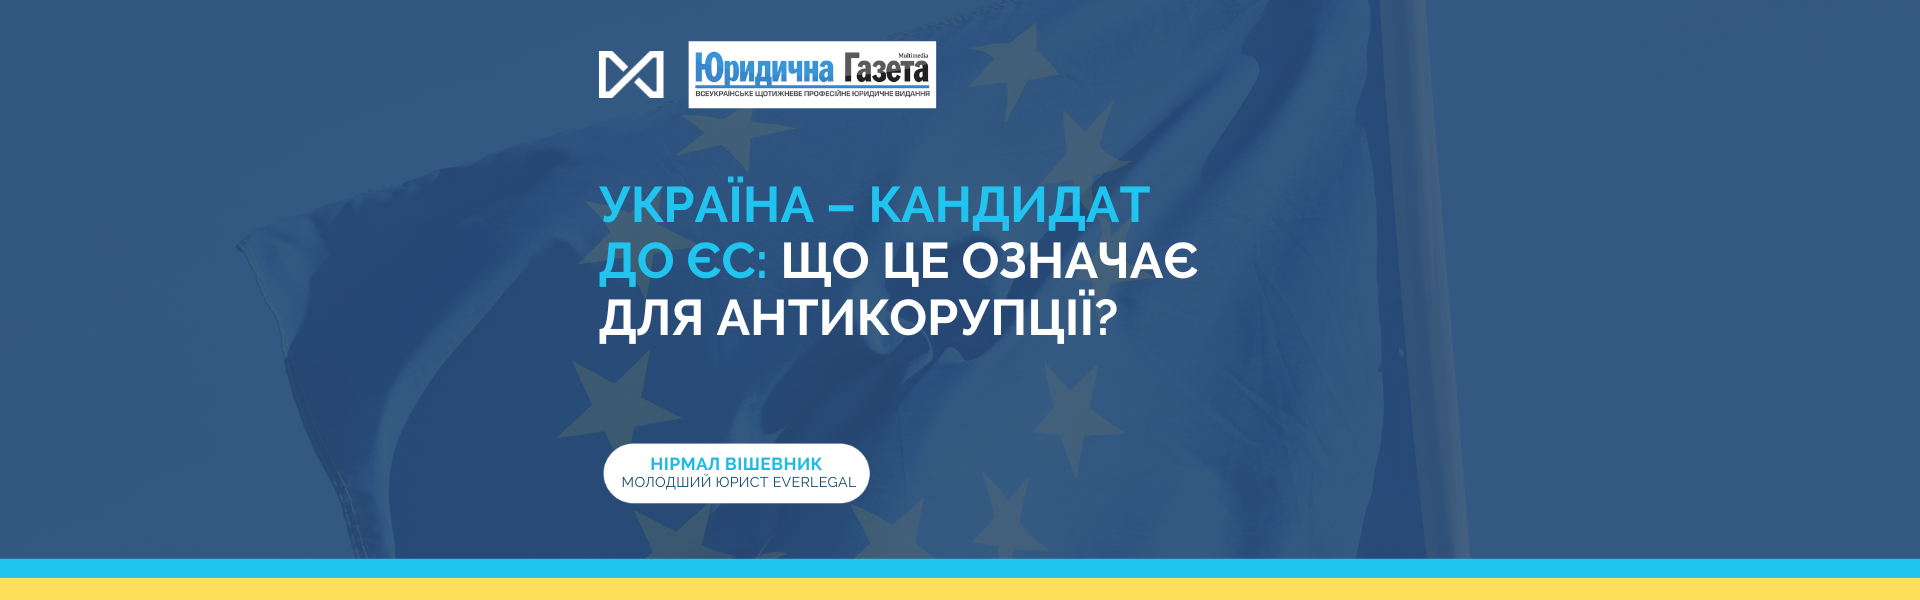 Ukraine is a candidate for the EU: what does this mean for anti-corruption?